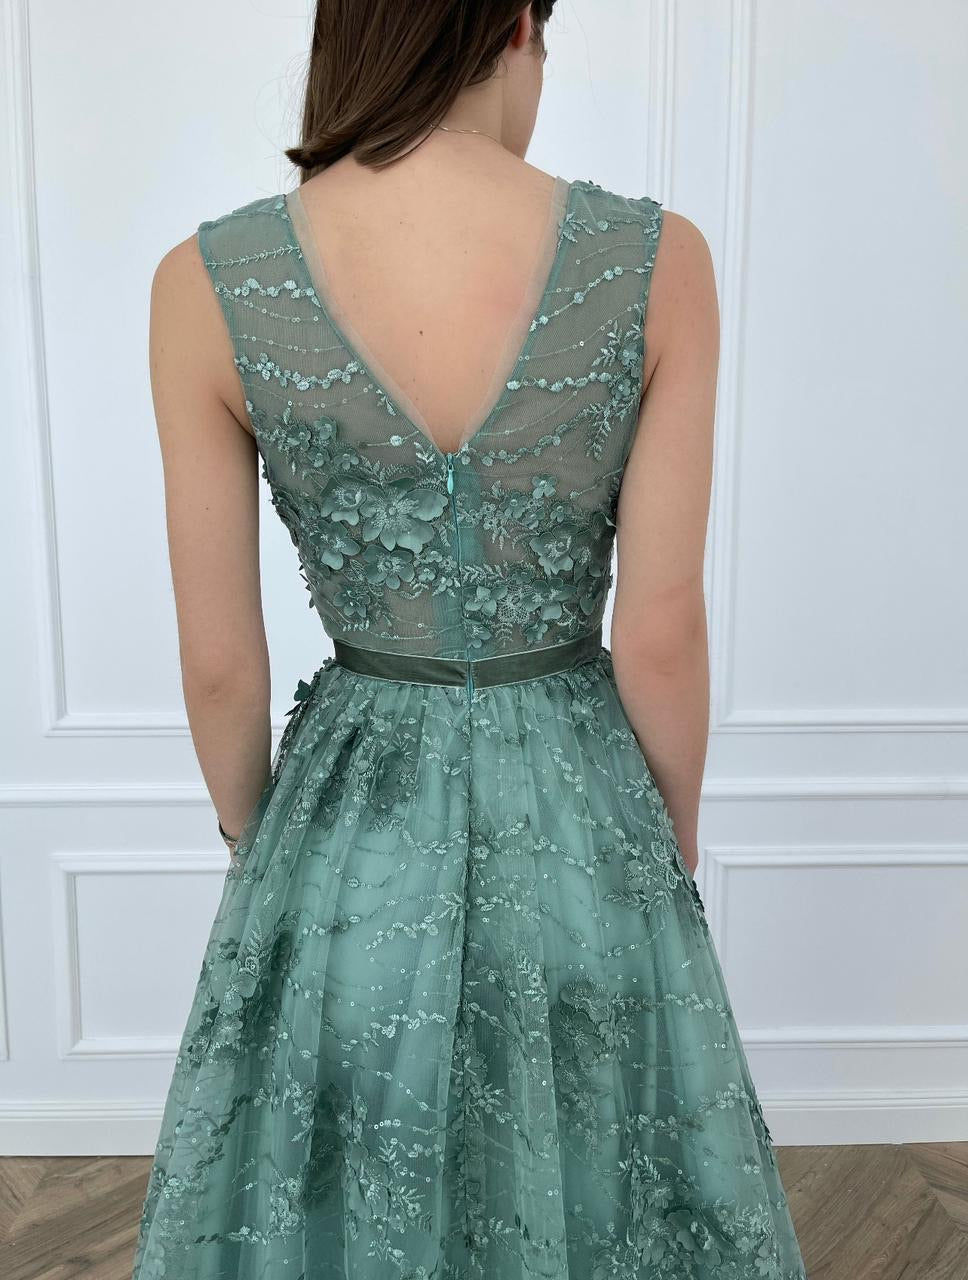 Green A-Line dress with lace, embroidery, v-neck and no sleeves